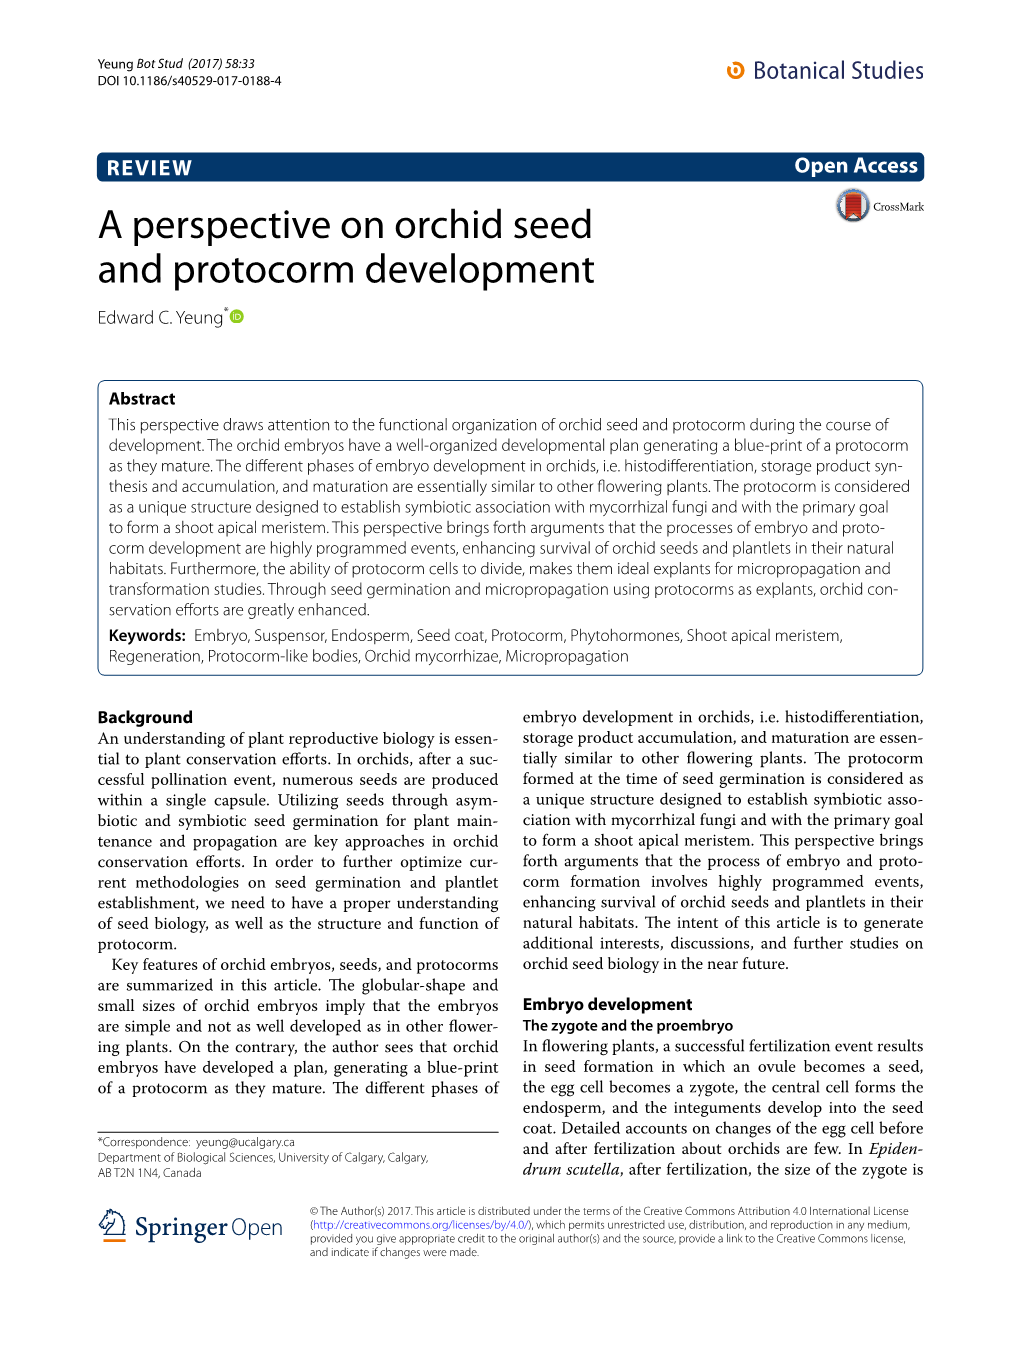 A Perspective on Orchid Seed and Protocorm Development Edward C